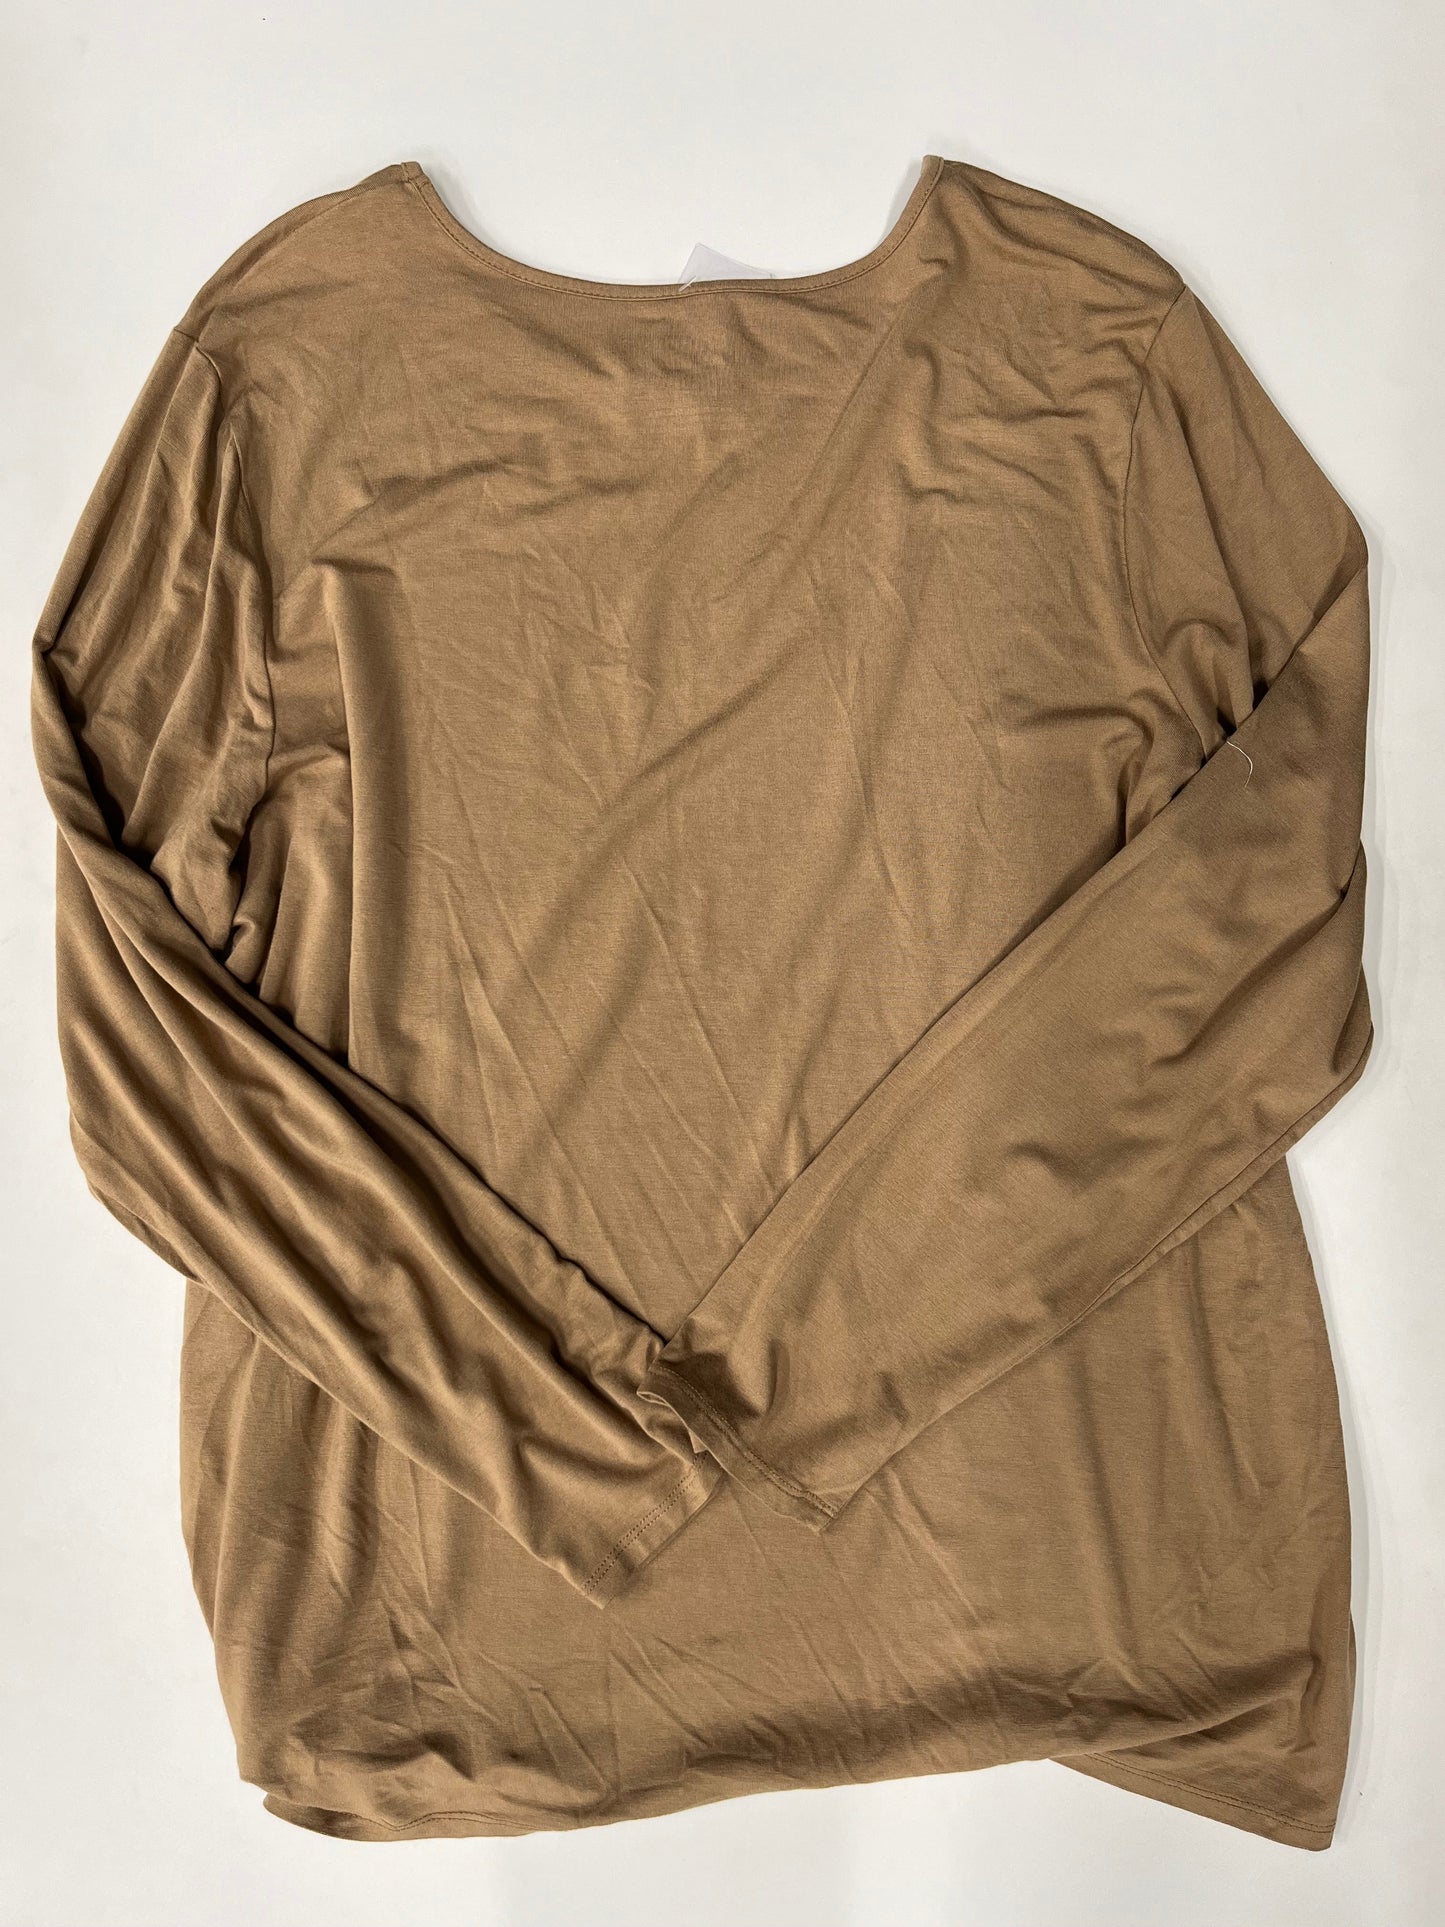 Top Long Sleeve Basic By Chicos  Size: 3x